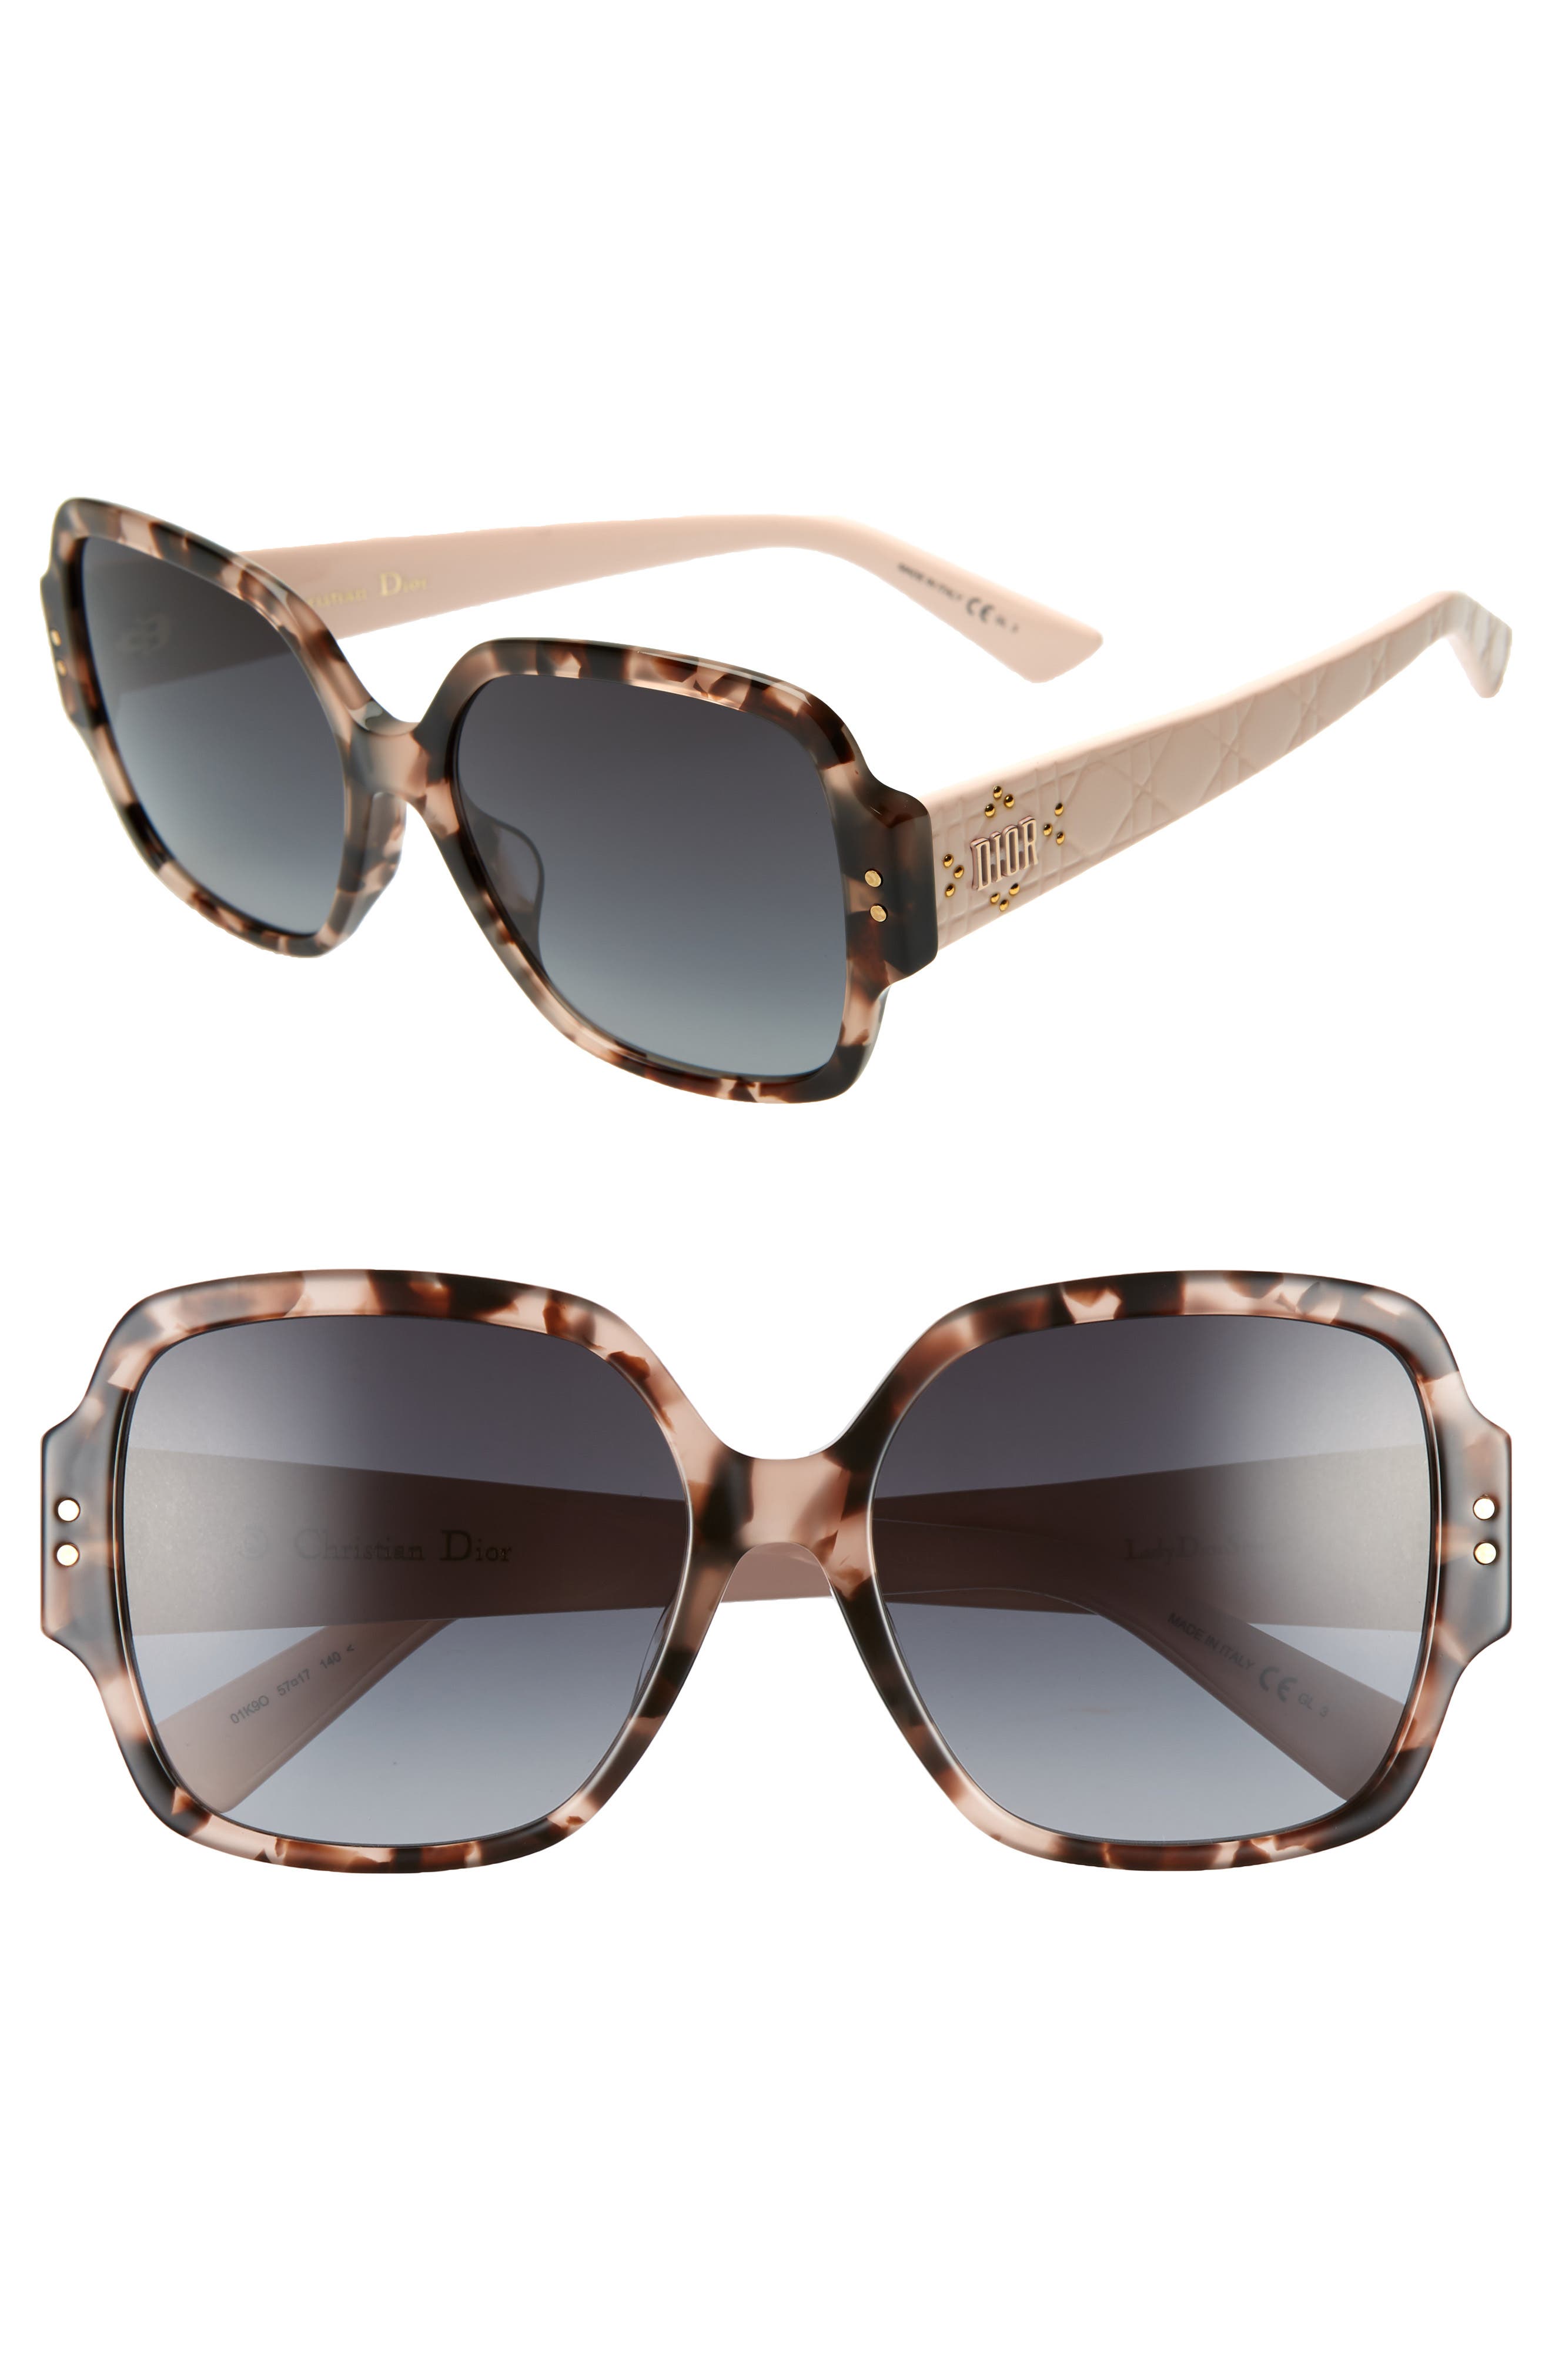 Dior | Lady Dior Stud 57mm Special Fit Square Sunglasses | HauteLook